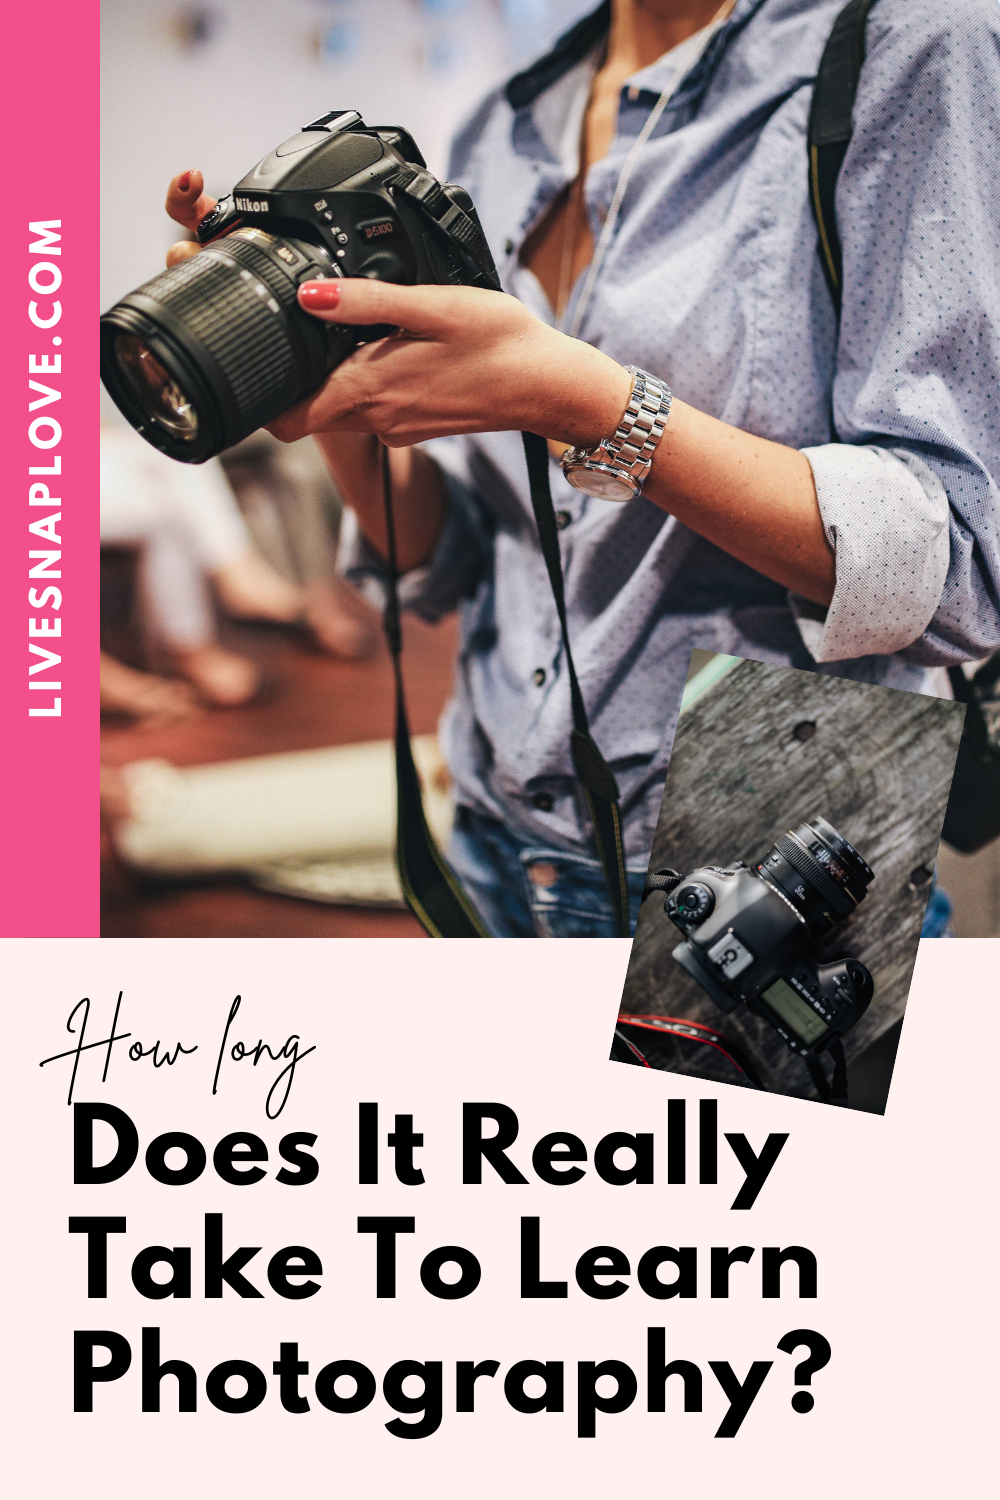 How Long Does It Really Take to Learn Photography?